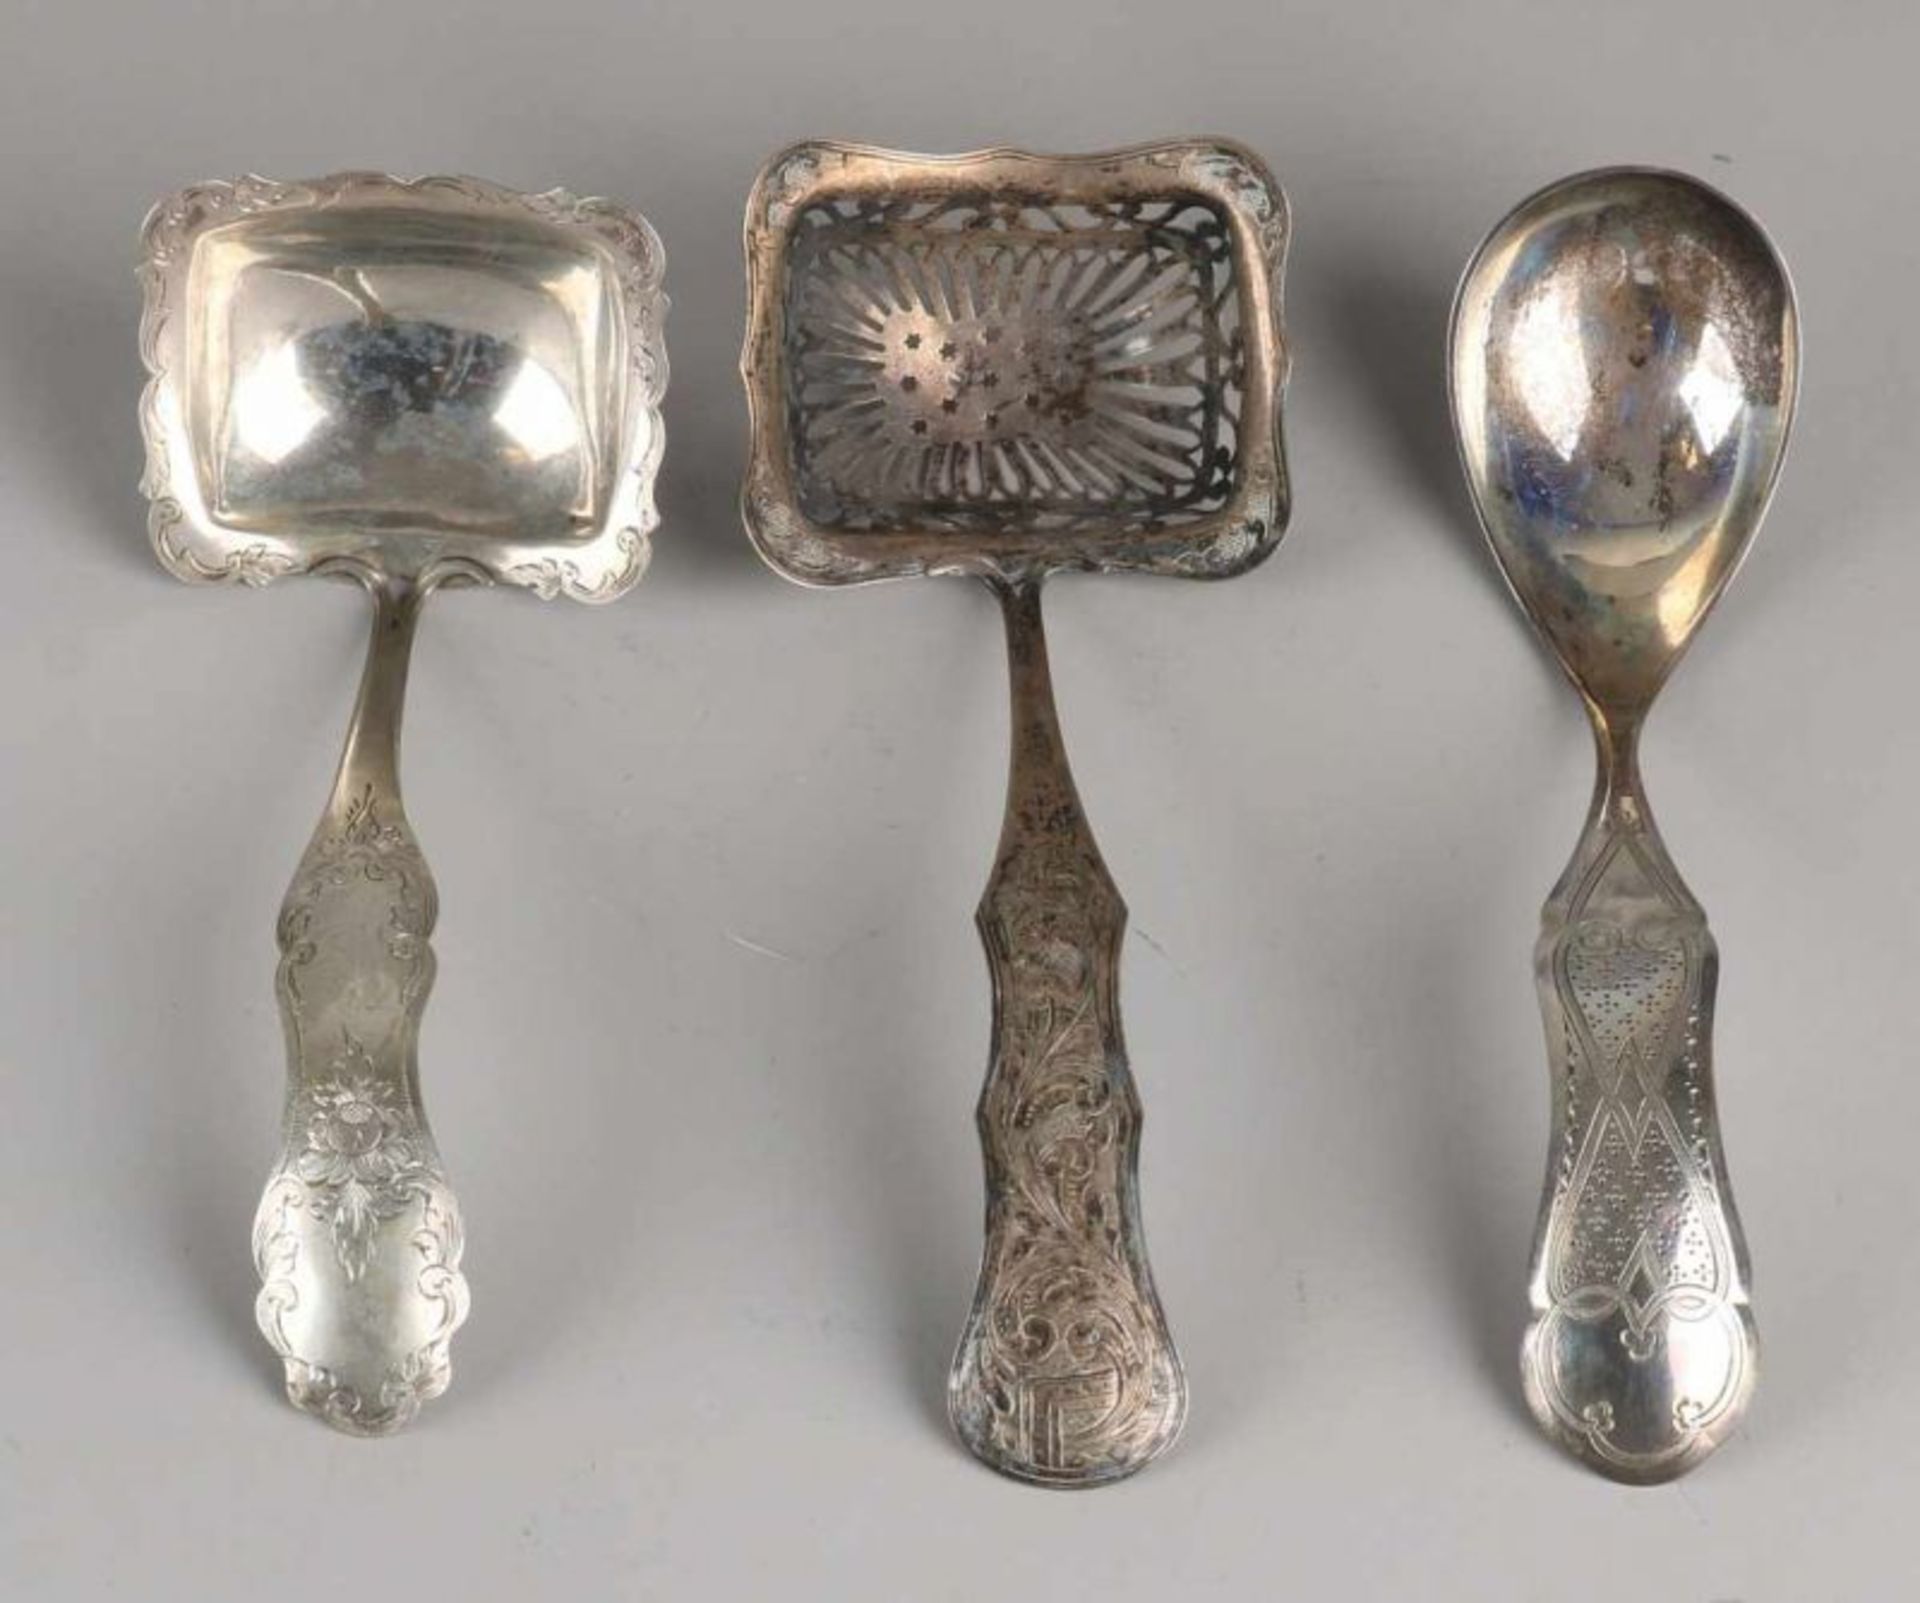 Three silver spoons, 833/000, with a sprinkle spoon with a rectangular open-work molded container is